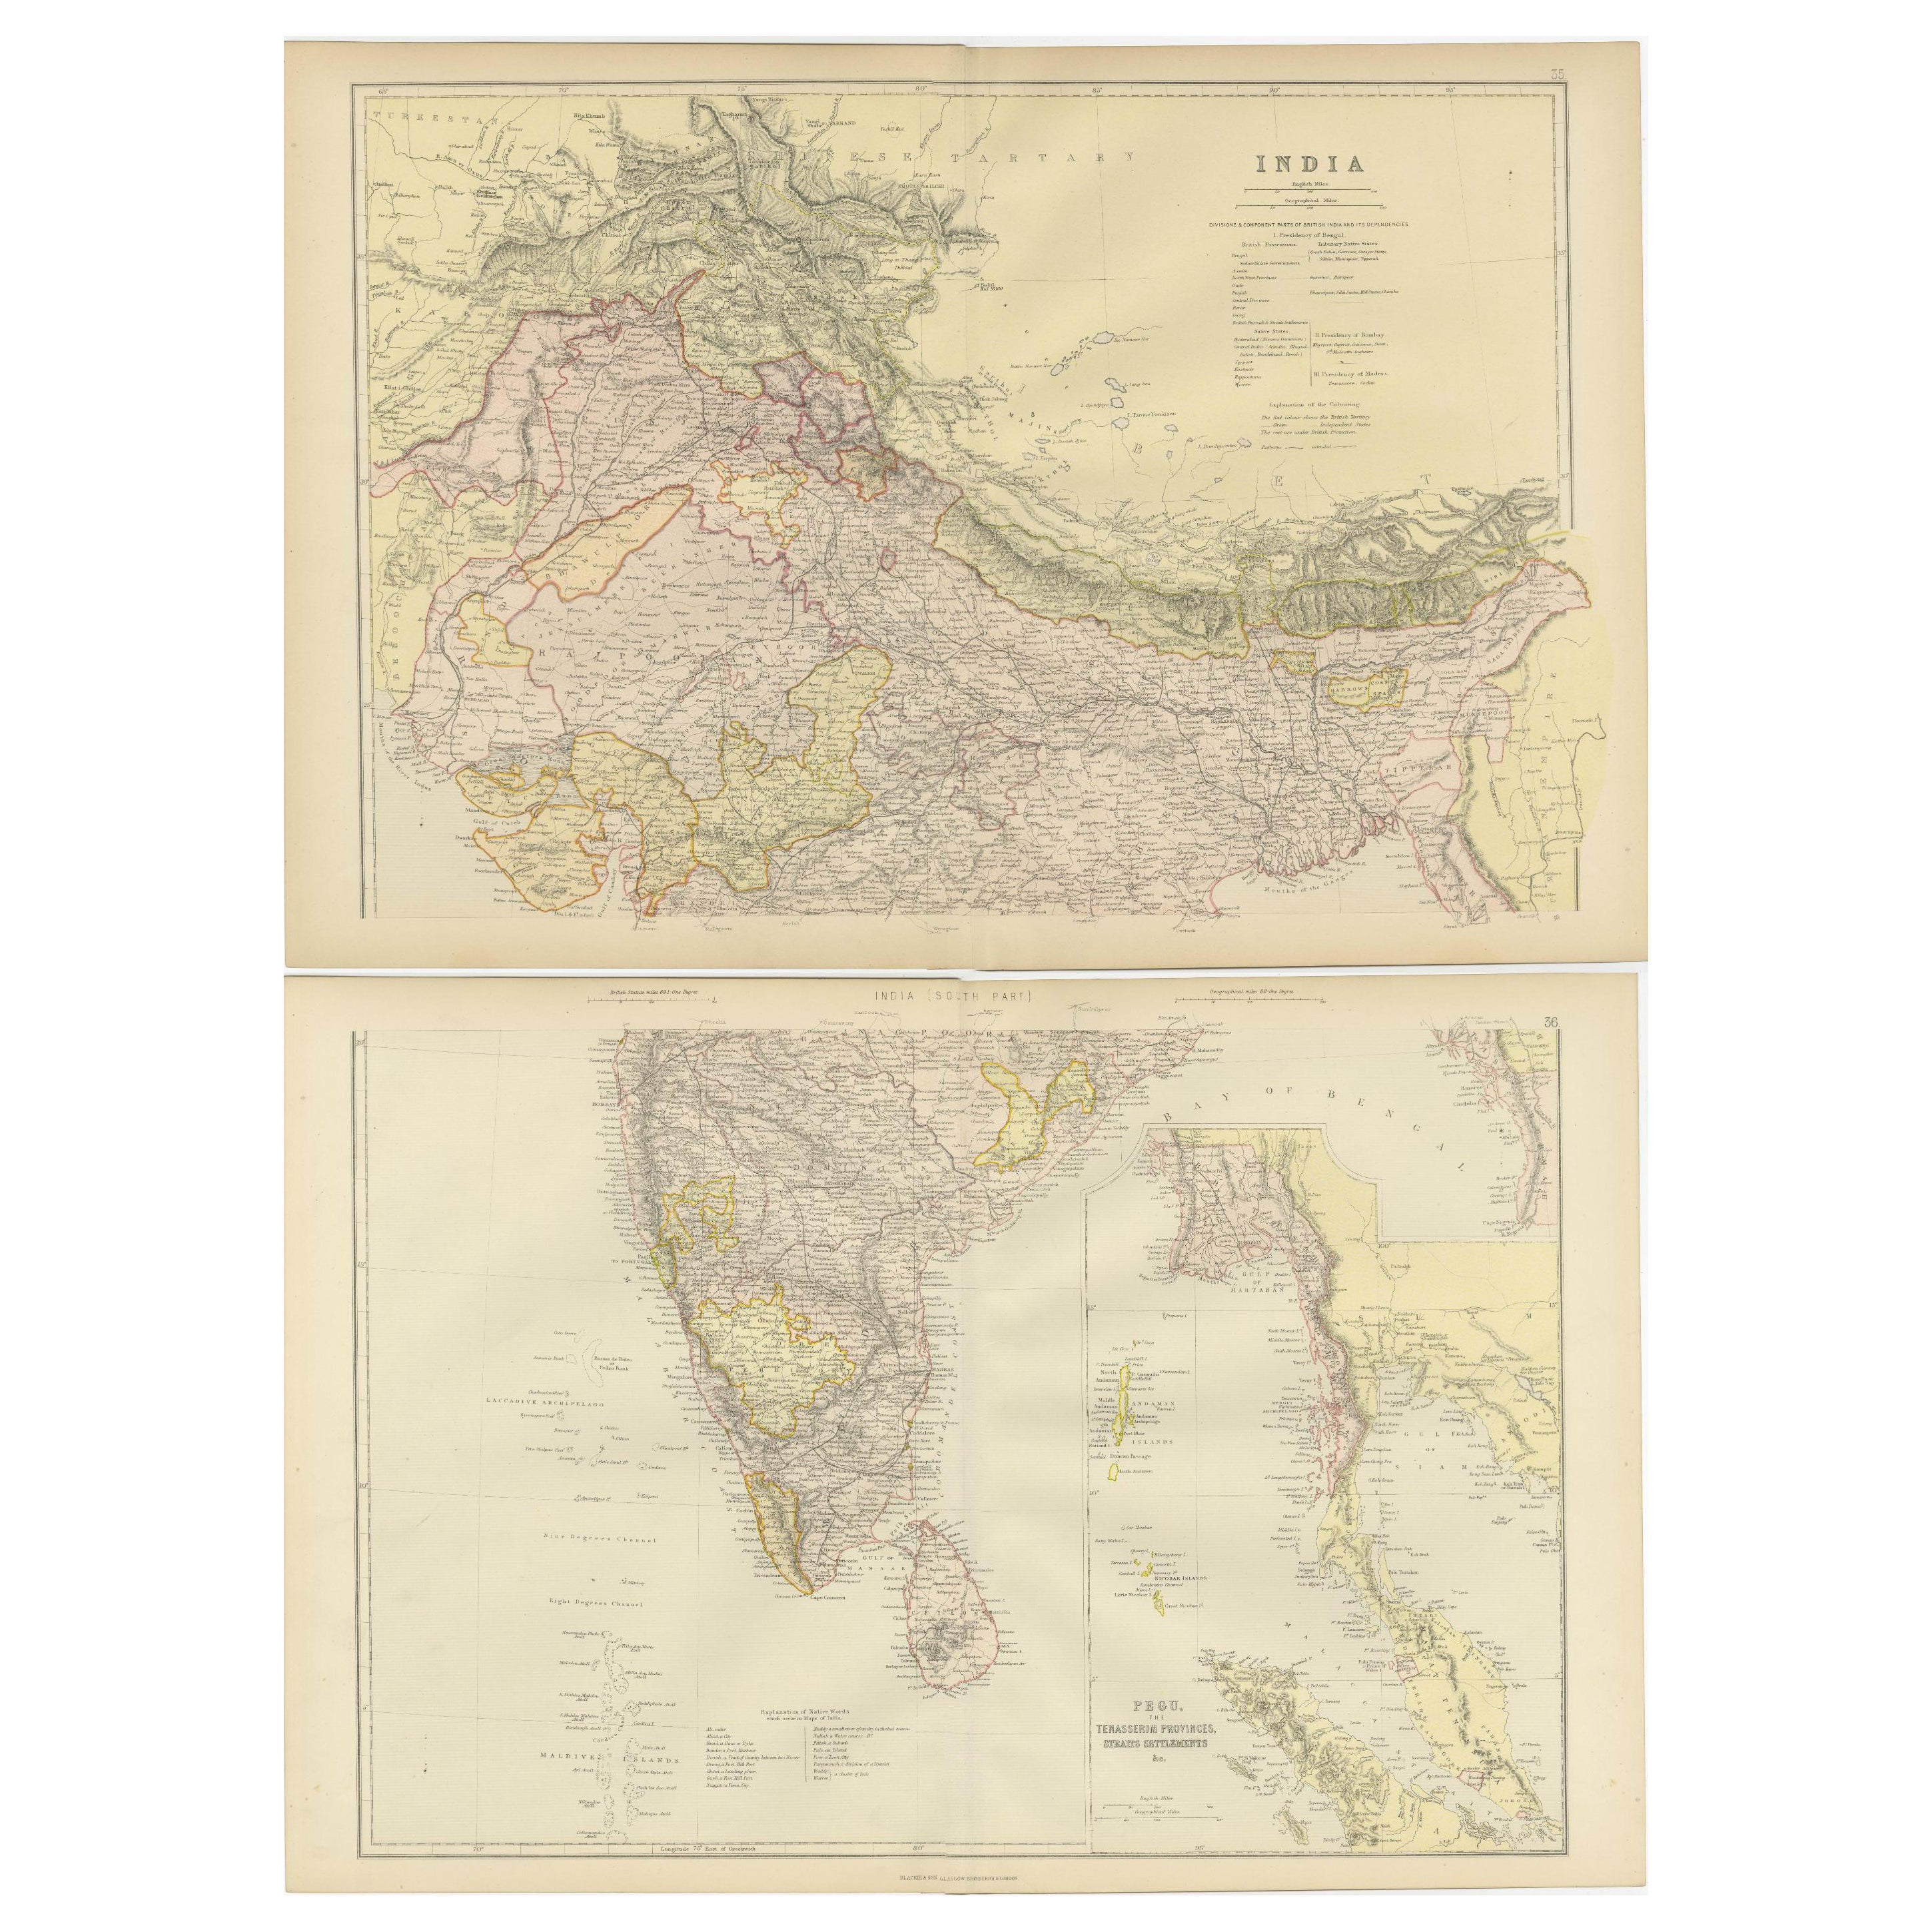 Cartographic Elegance: The British Raj's India, 1882 Atlas by Blackie and Son For Sale